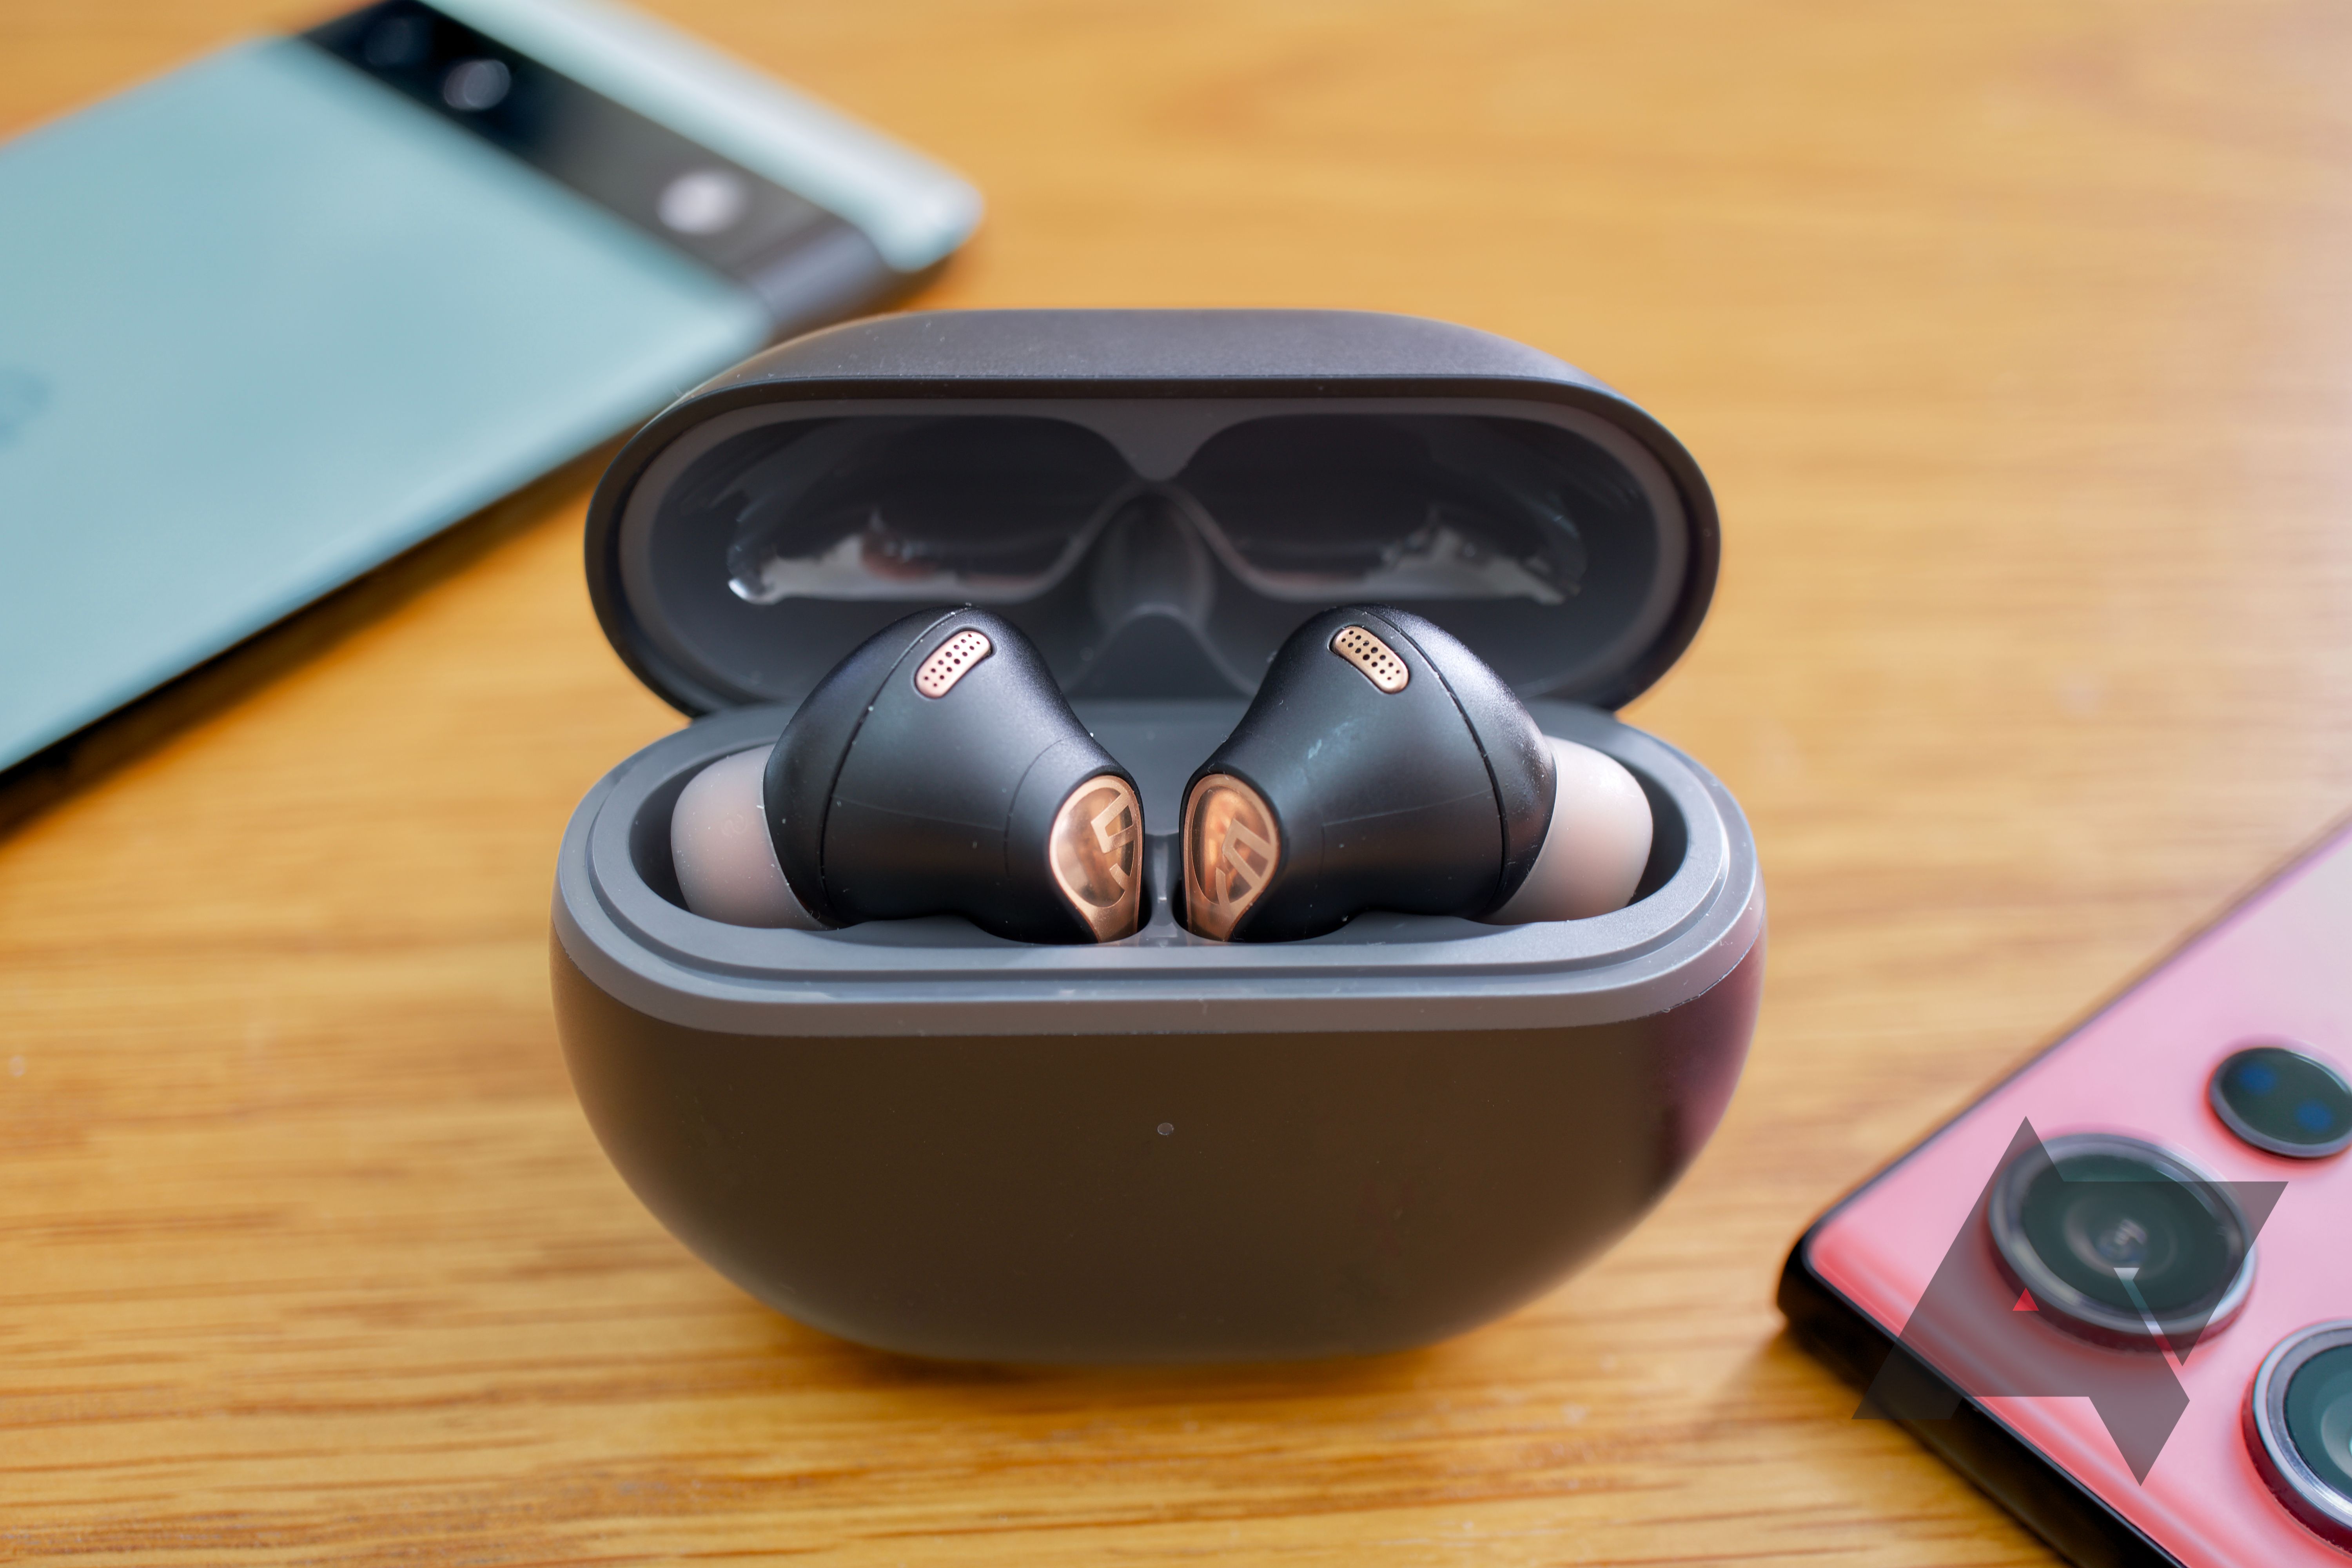 No AirPods 3 yet? Nab these new SoundPeats buds for $37.49 instead